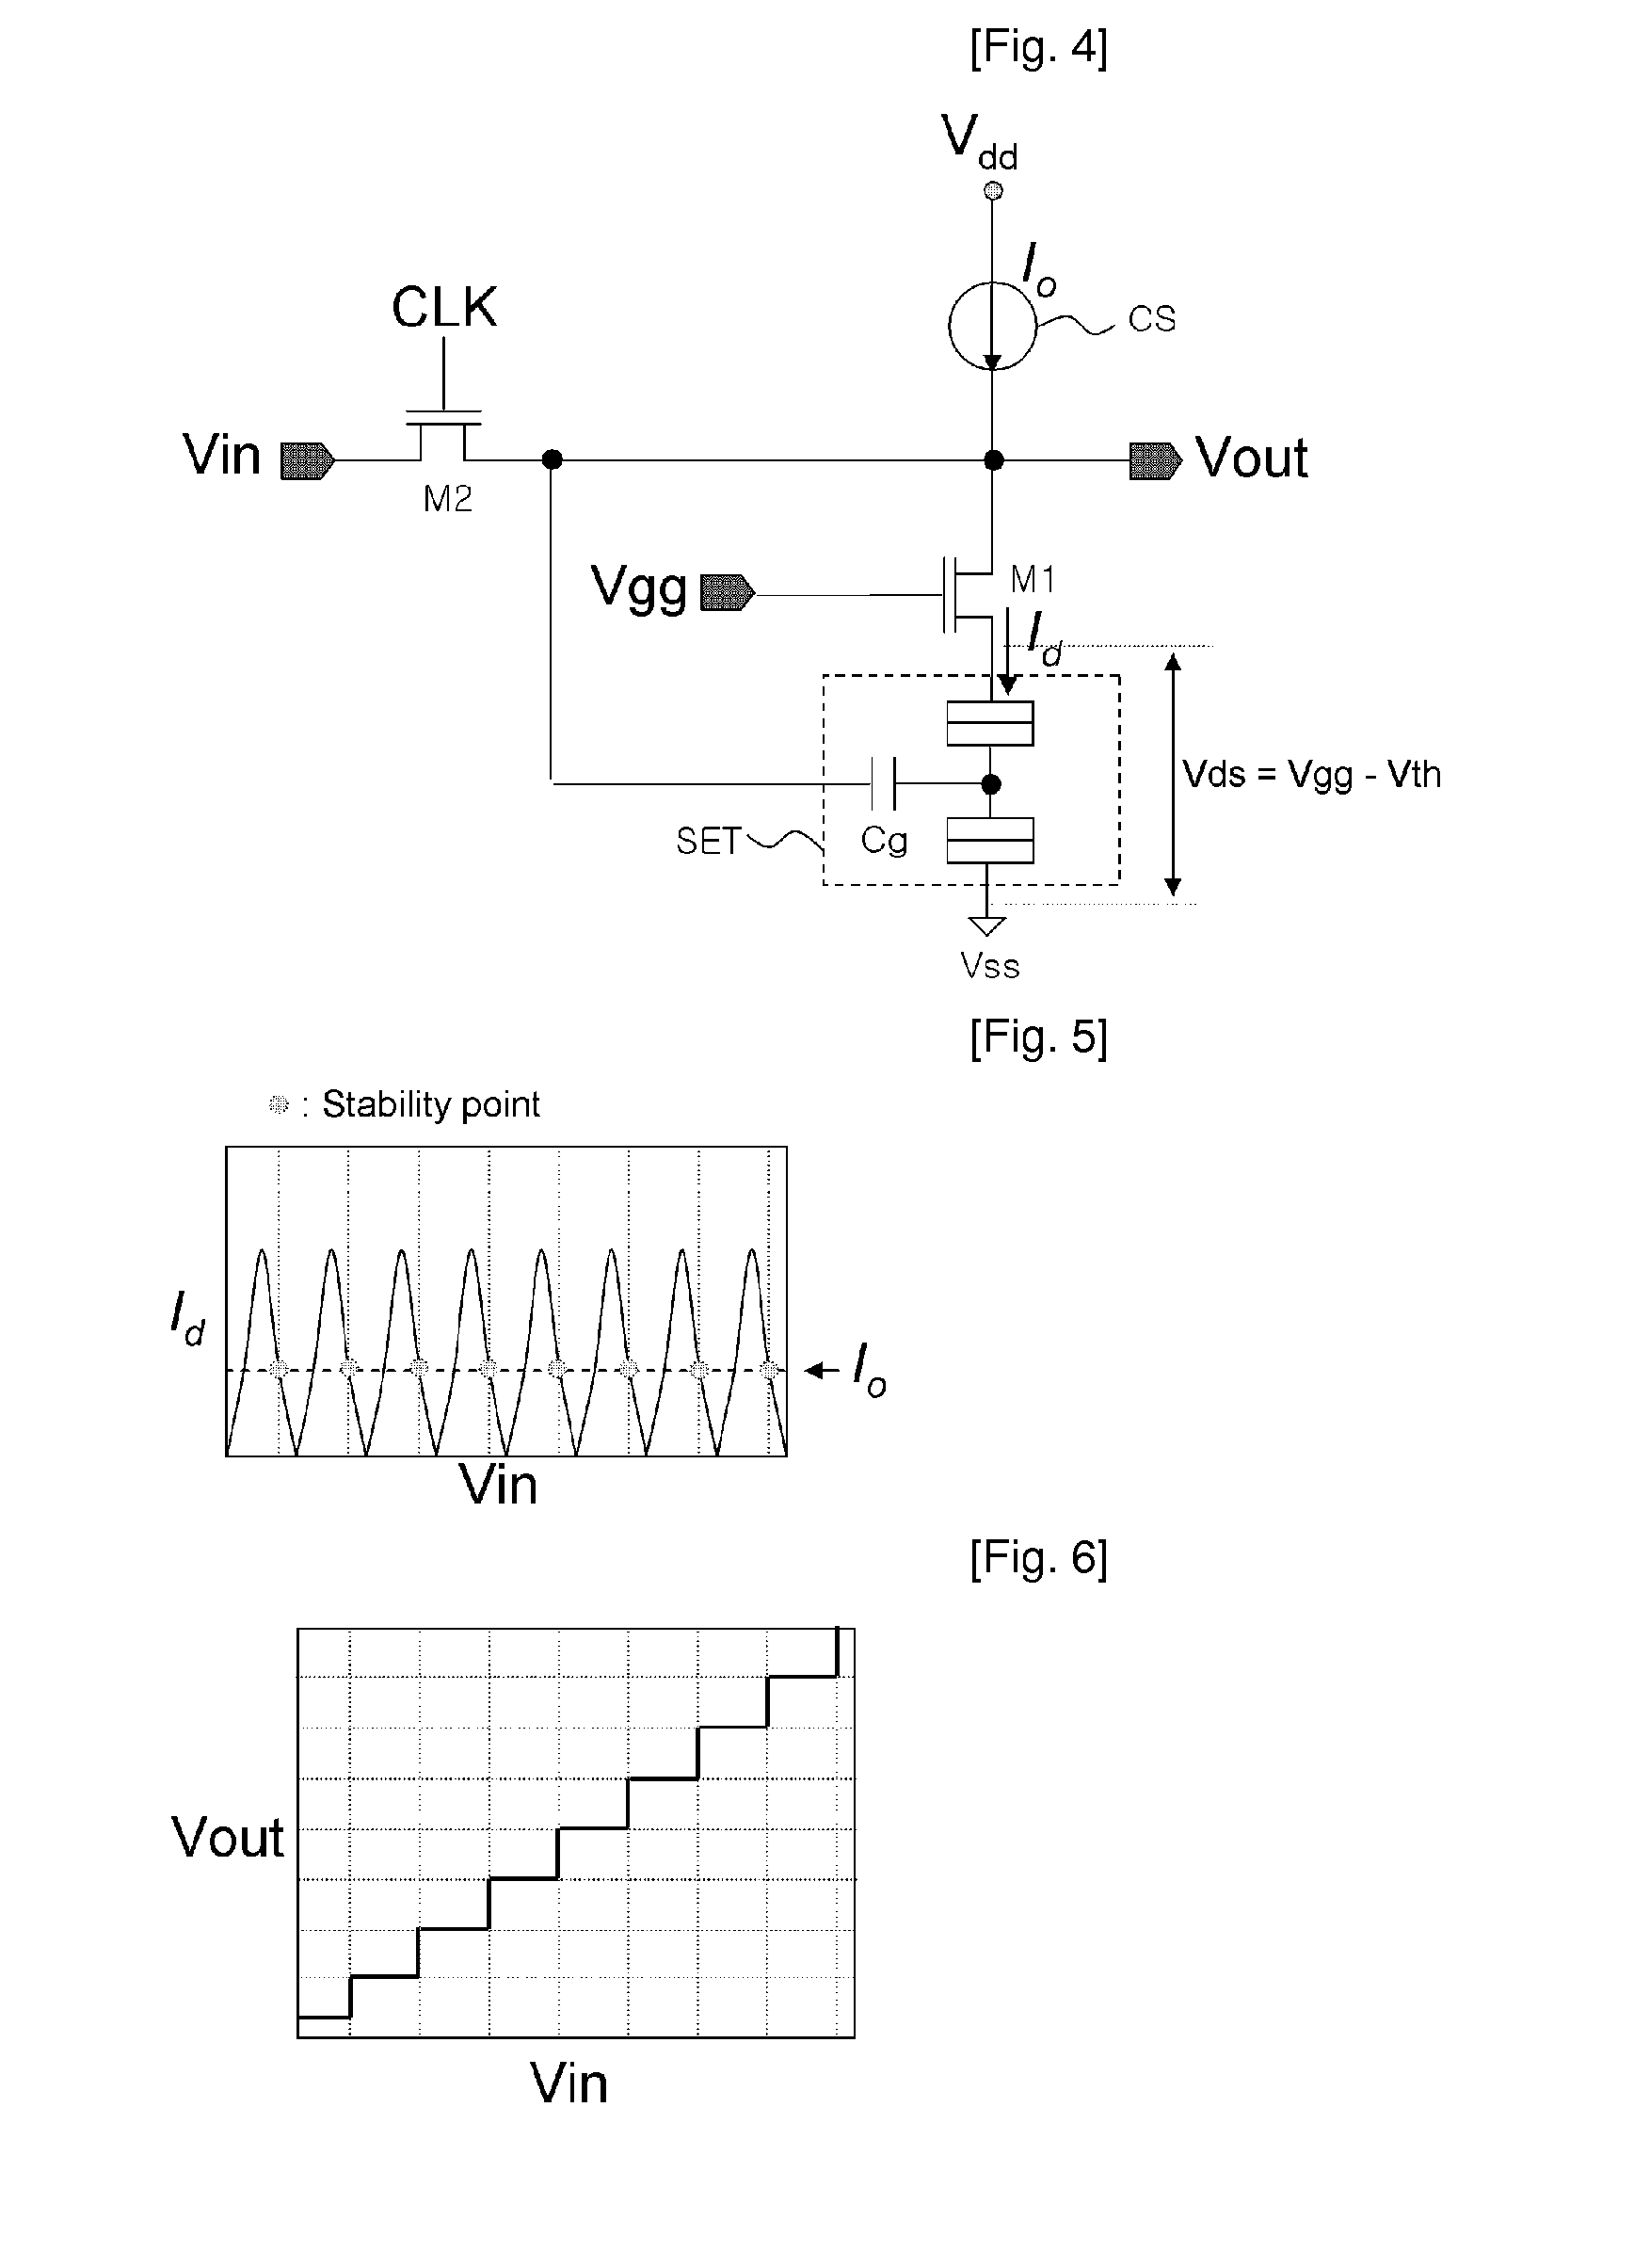 Multiple valued dynamic random access memory cell and thereof array using single electron transistor